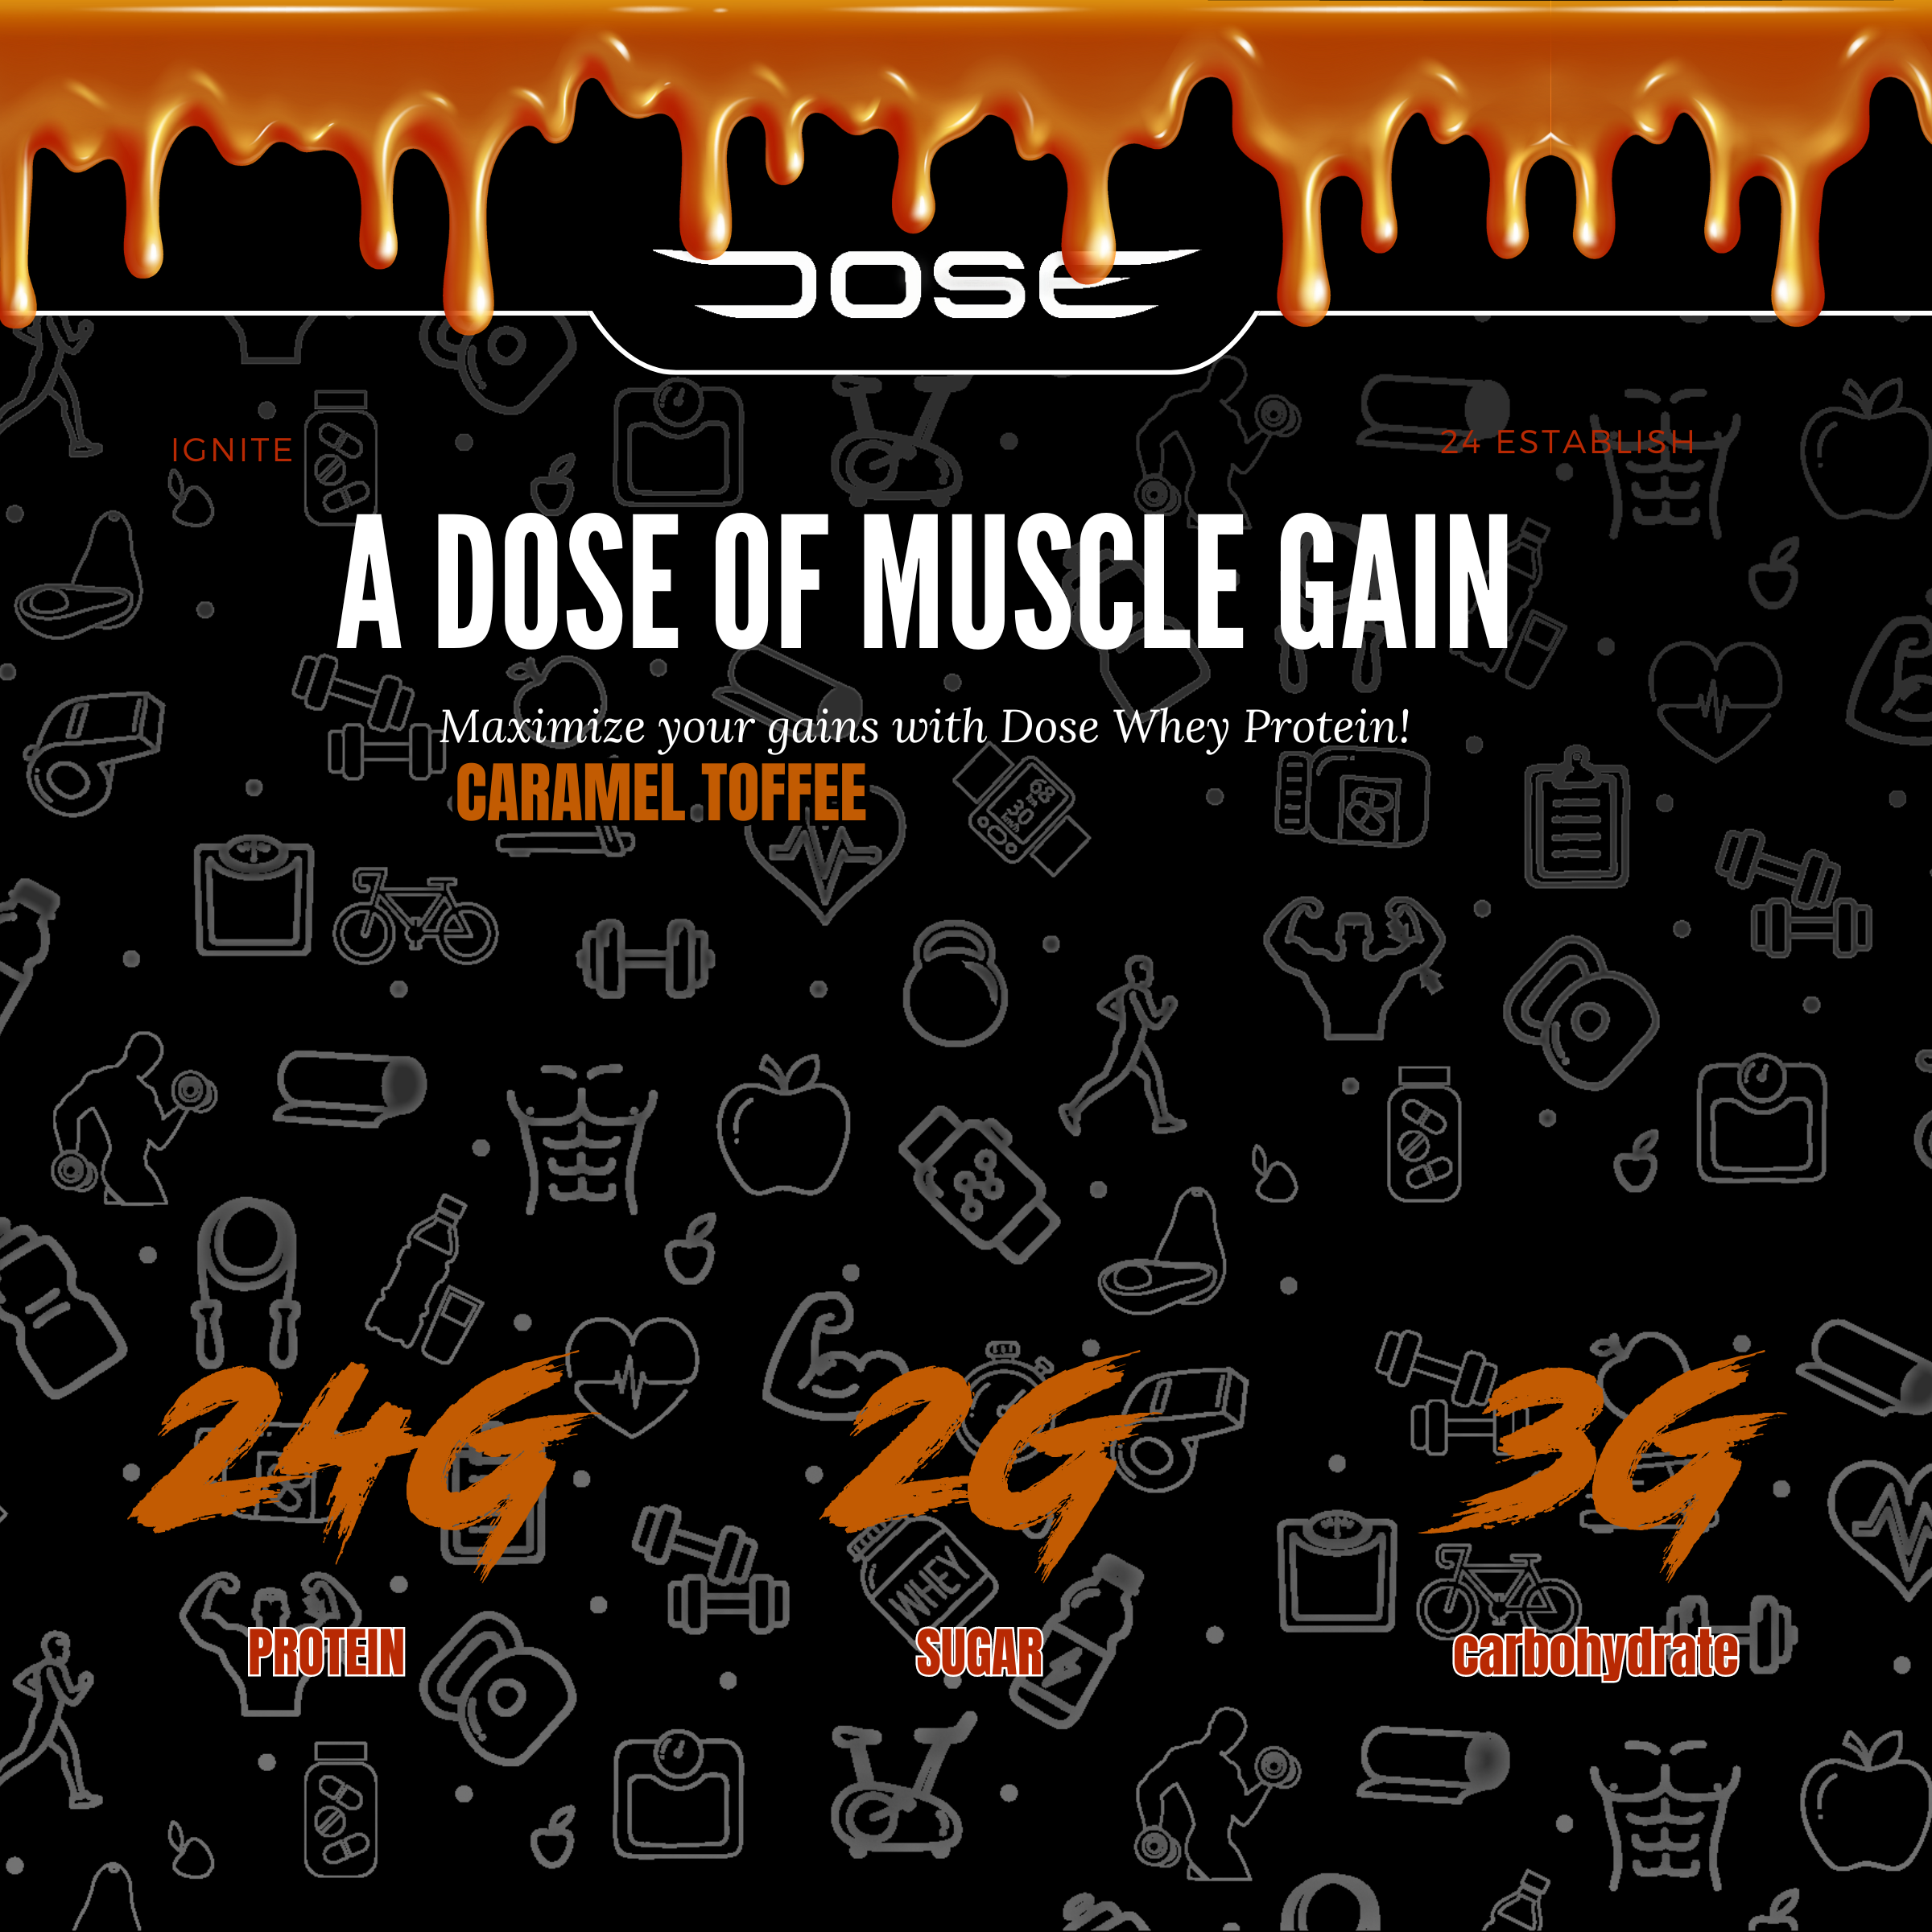 Dose Fuel Caramel Toffee Protein Powder - 24g Protein, 2g Sugar, 3g Carbohydrate, Maximize Gains with Dose Whey Protein, A Dose of Muscle Gain